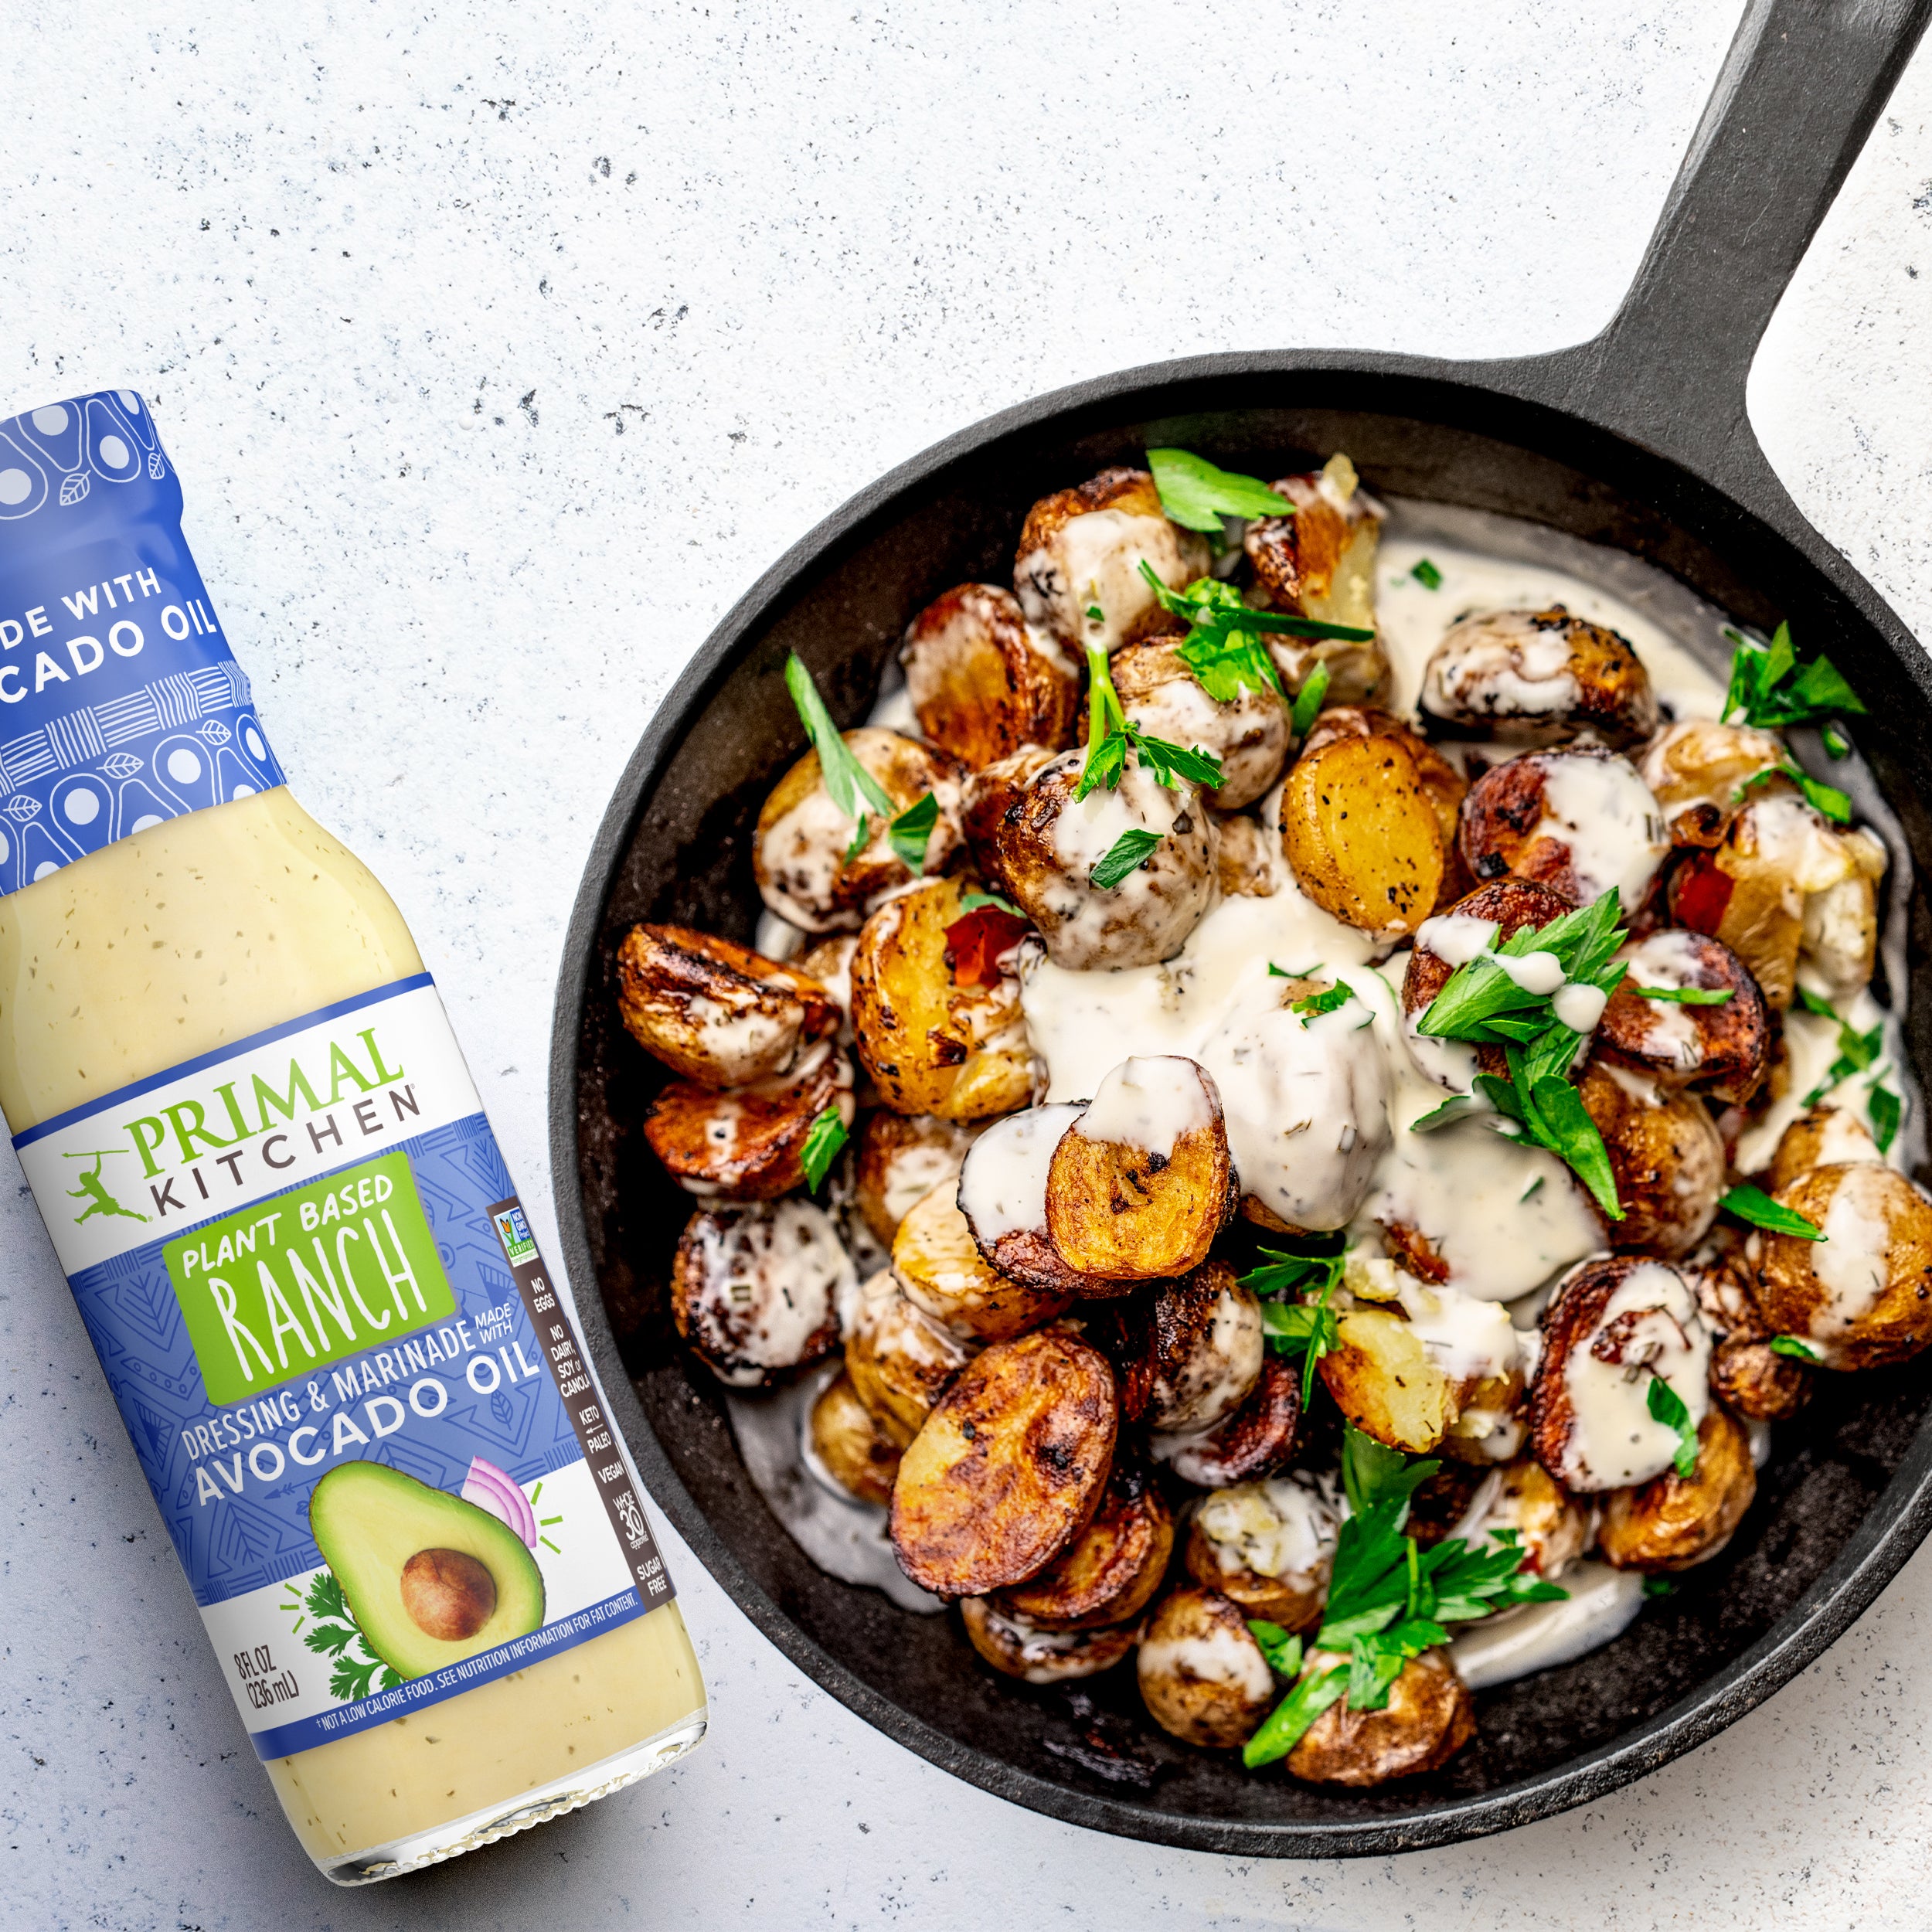 A skillet of golden brown sliced potatoes topped with a creamy vegan ranch sauce next to a bottle of Primal Kitchen Plant Based Ranch Dressing.